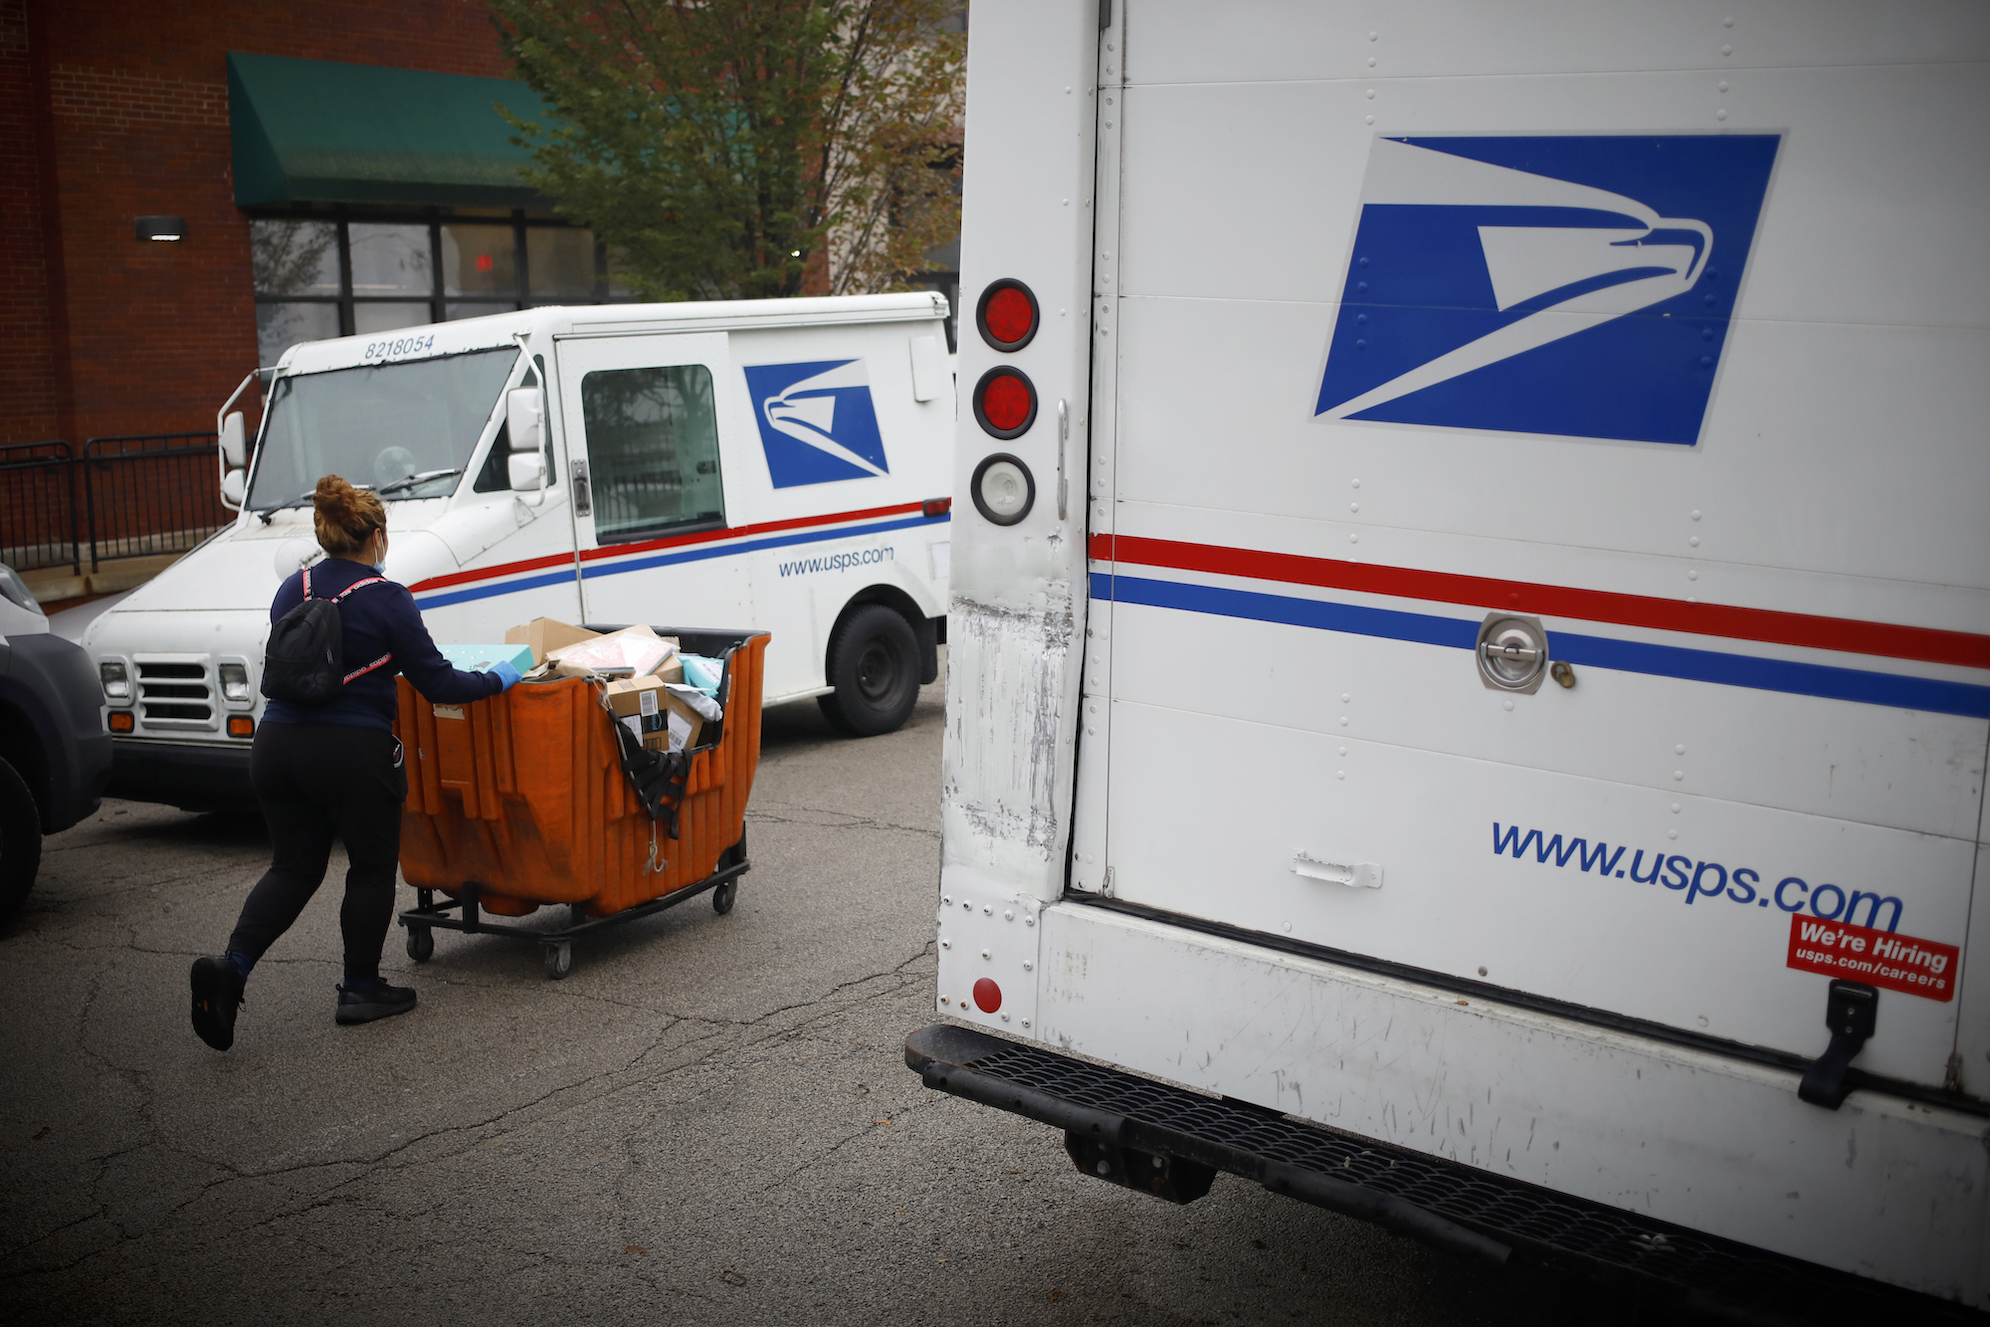 The life-upending flaw that USPS won't fix | TechCrunch